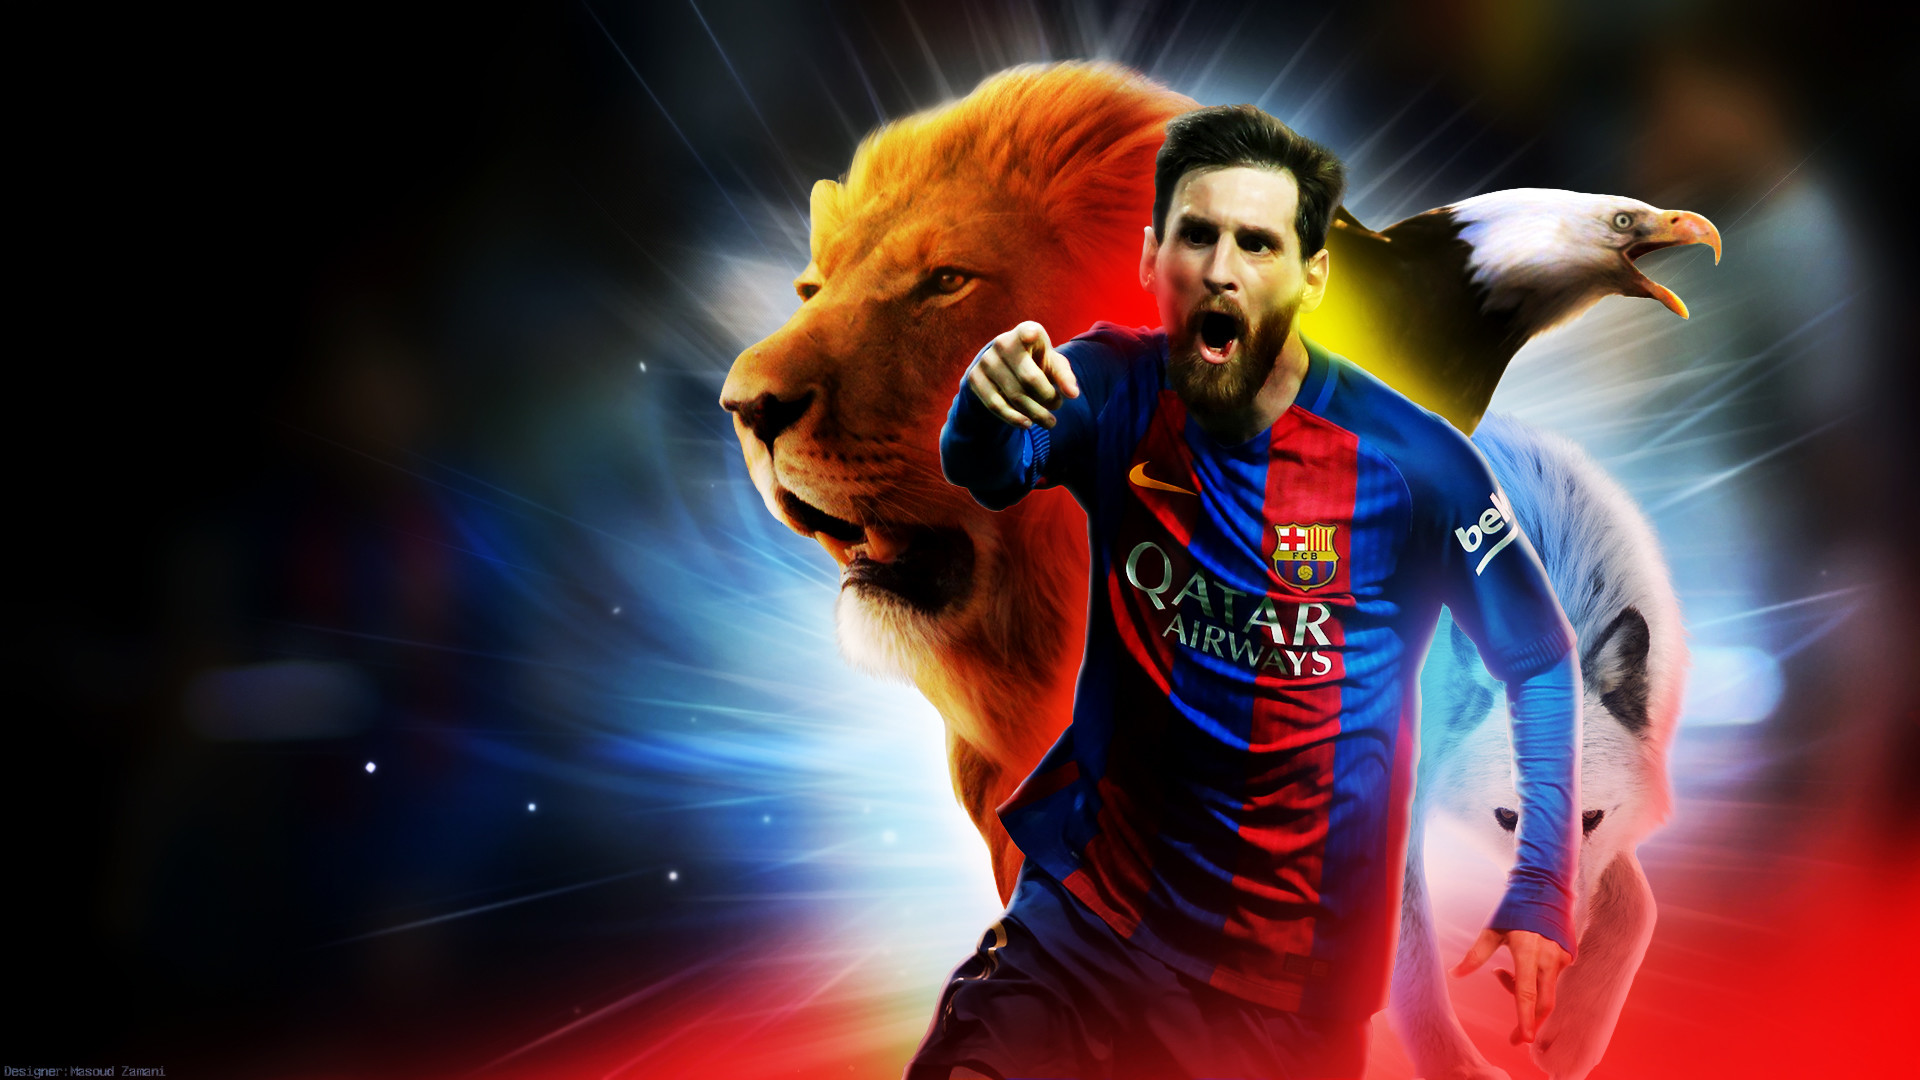 wallpapers hd messi,football player,soccer player,player,fan,sports